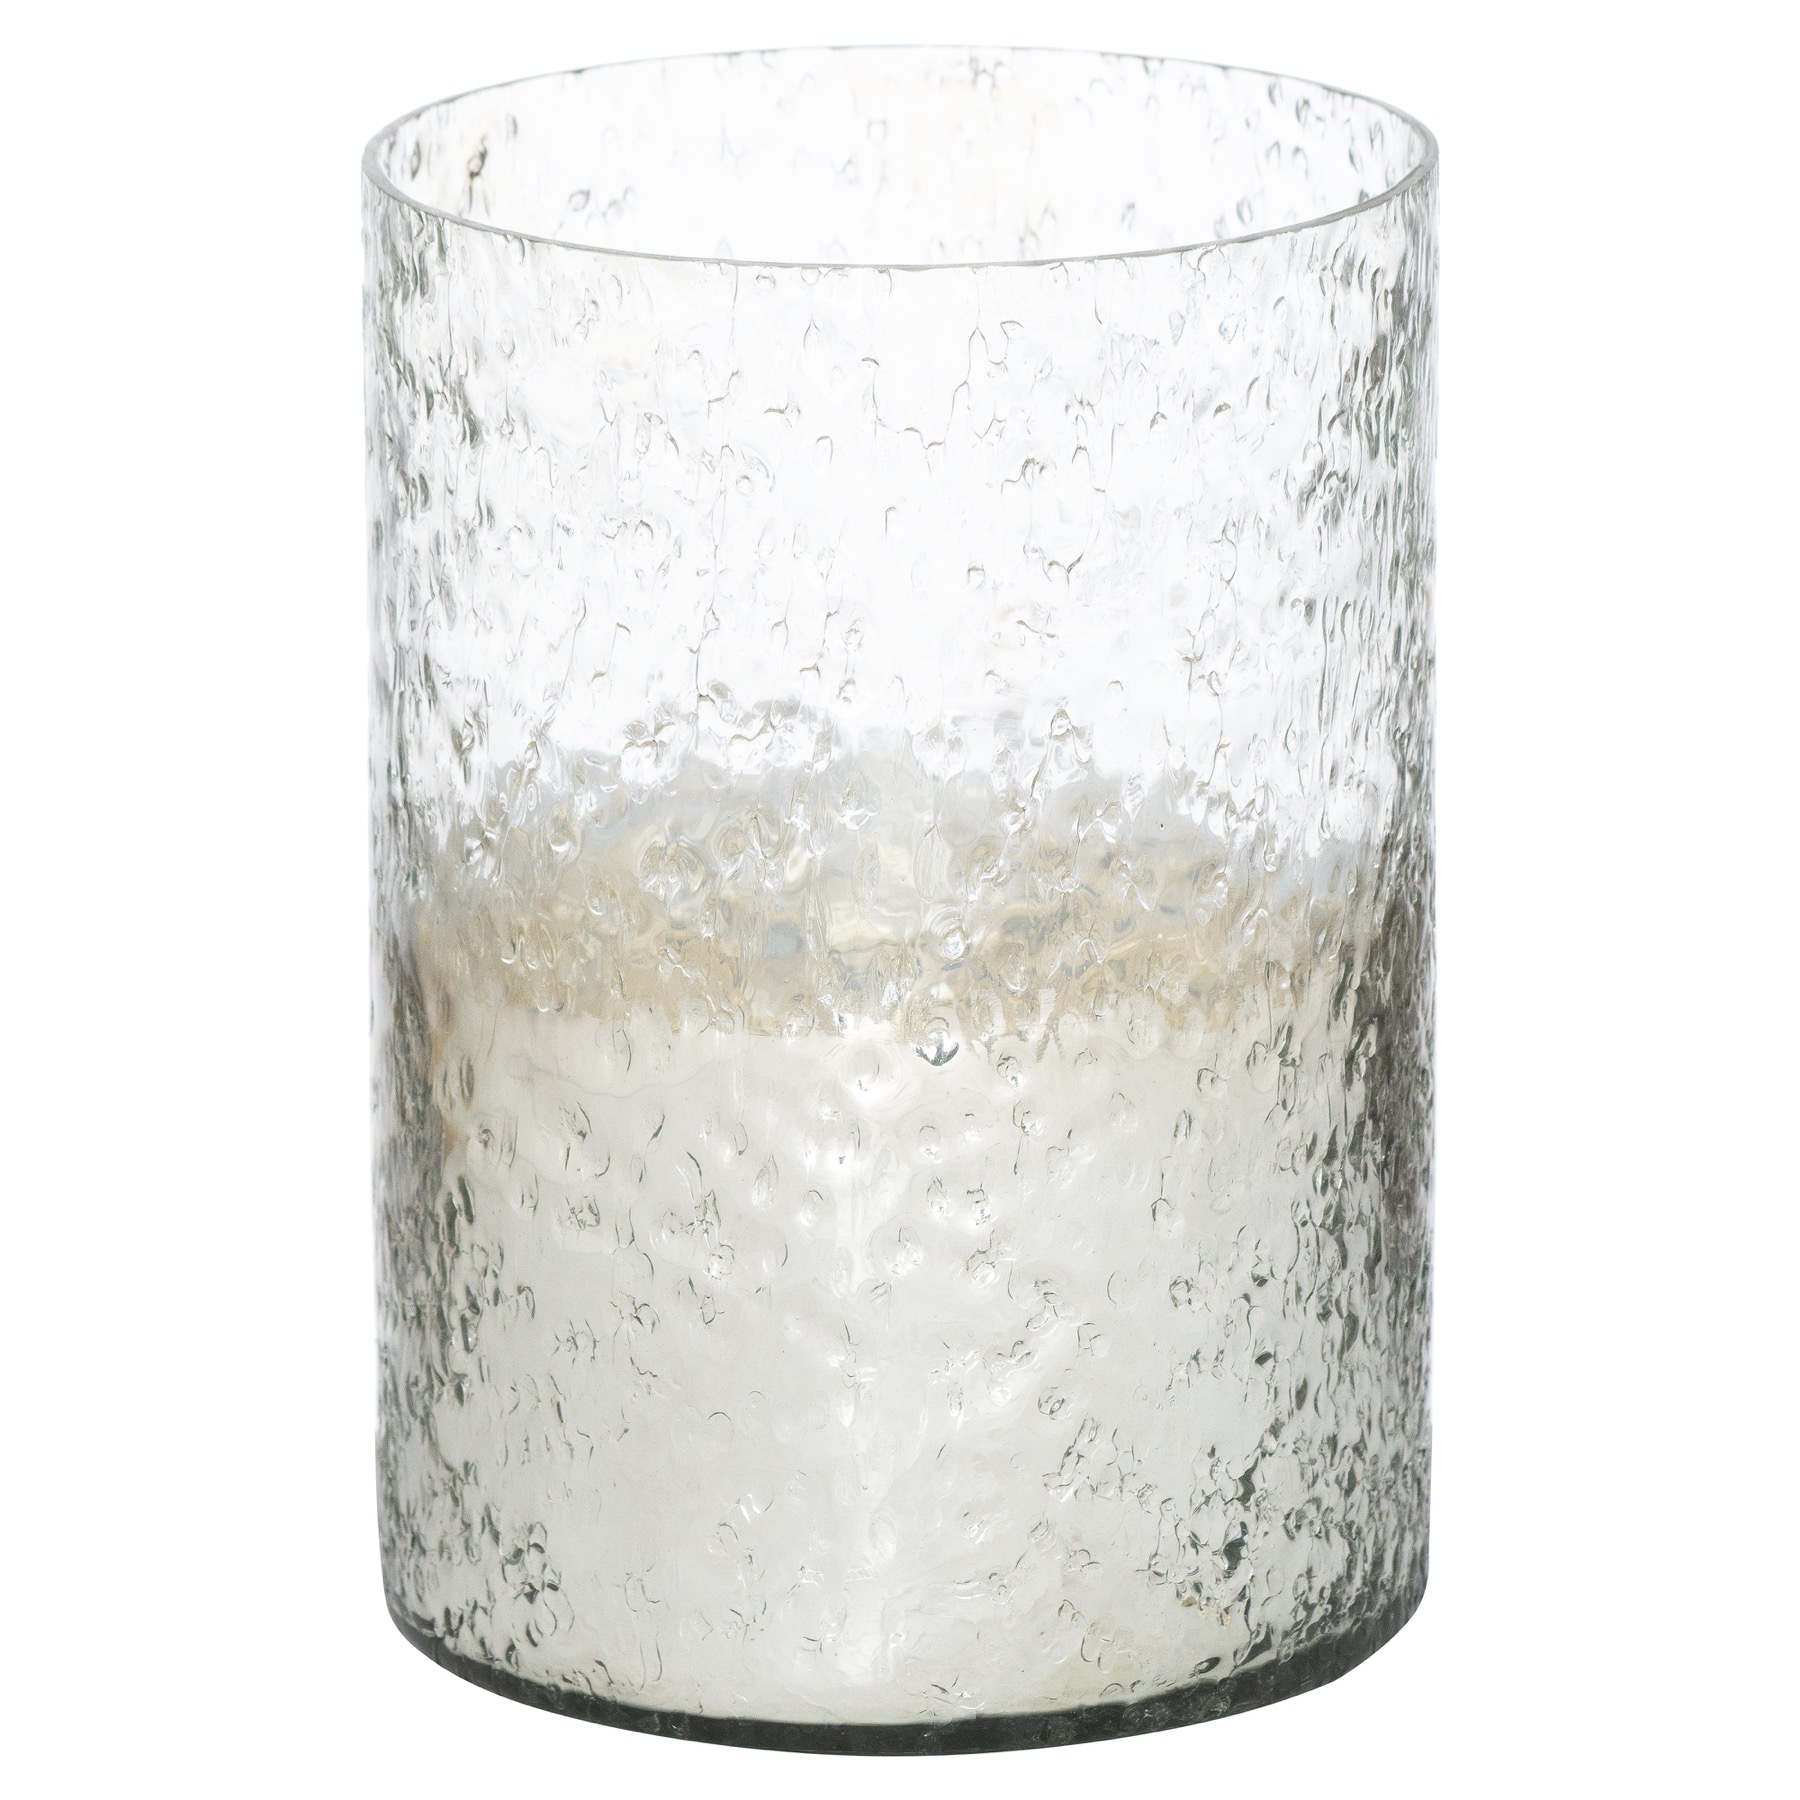 Lustre Silver Cylindrical Candle Holder - Image 1